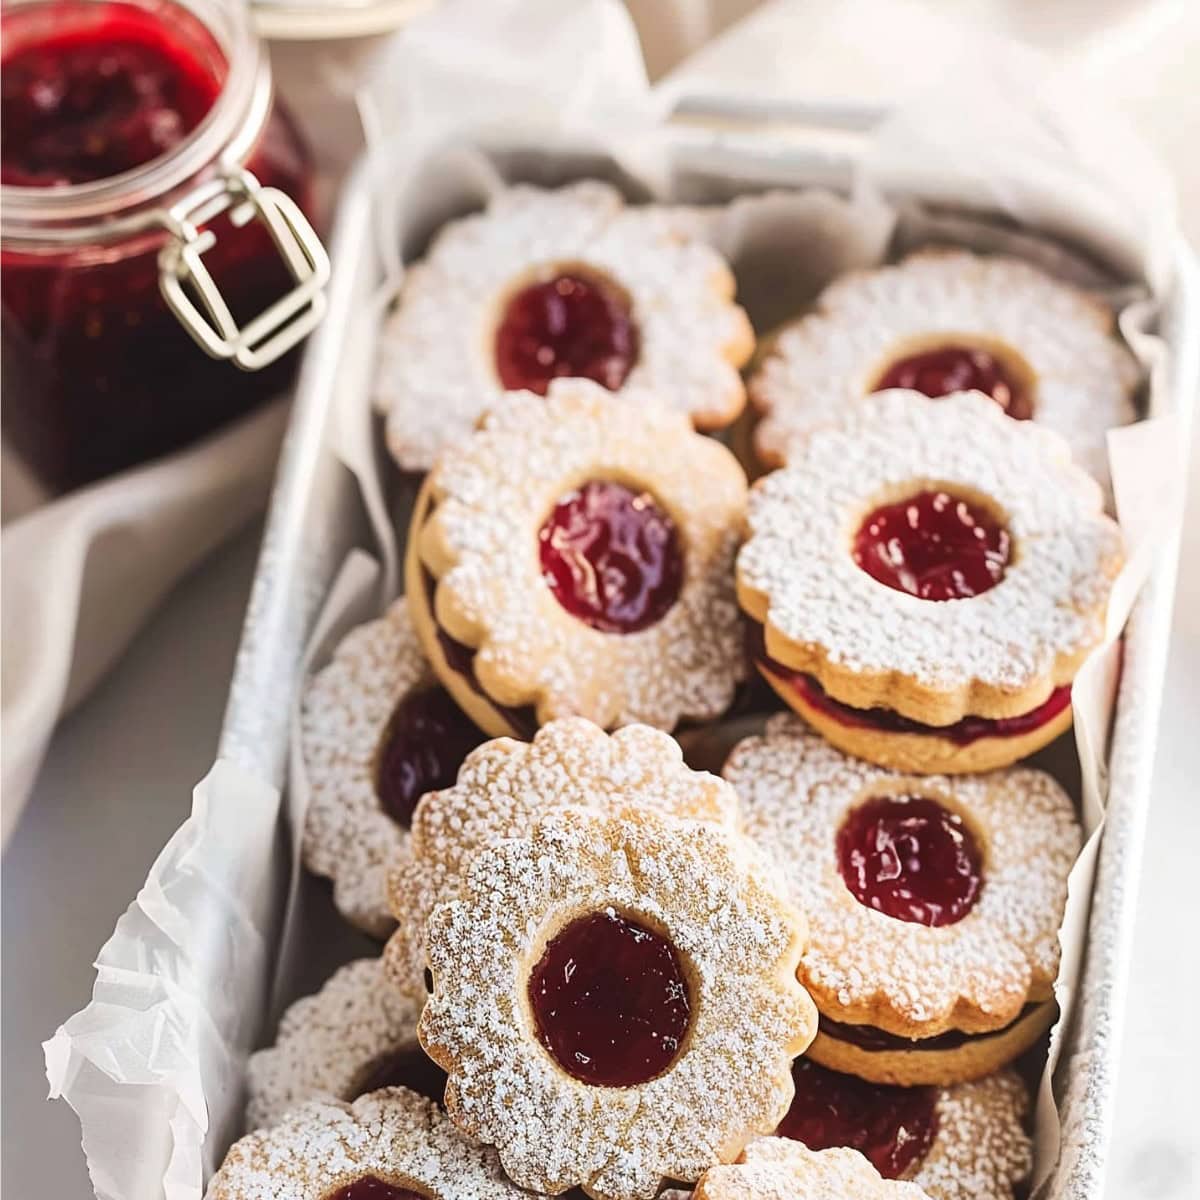 Raspberry, Powdered Sugar-Dusted Linzer Cookies in a Tin with Parchment Paper and a Jar of Raspberry Jam to the Side